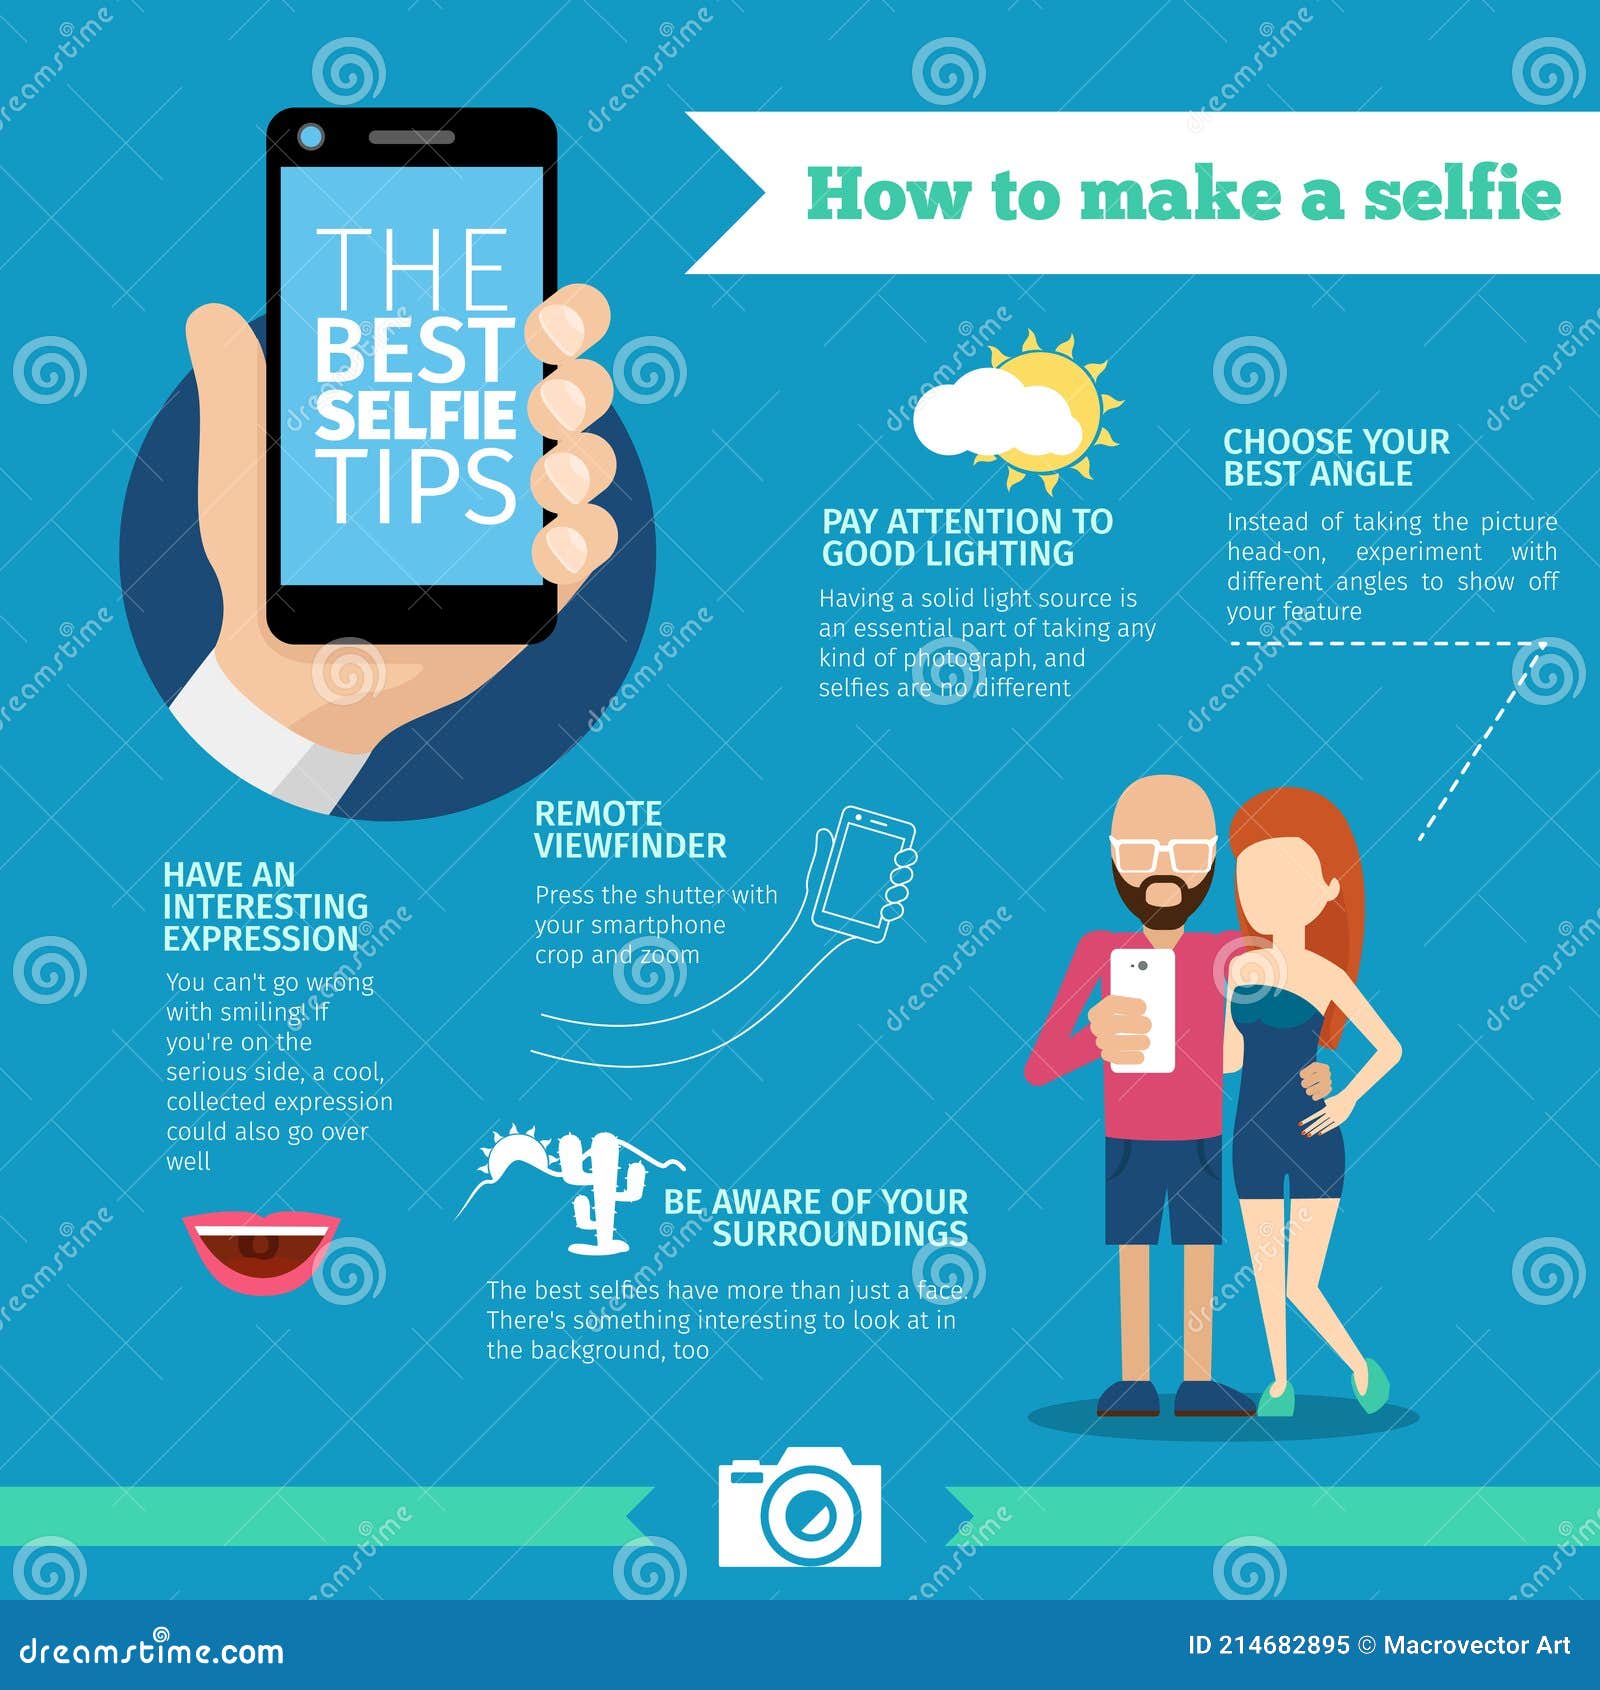 3 Easy Ways to Look Smart in Photos - wikiHow Fun